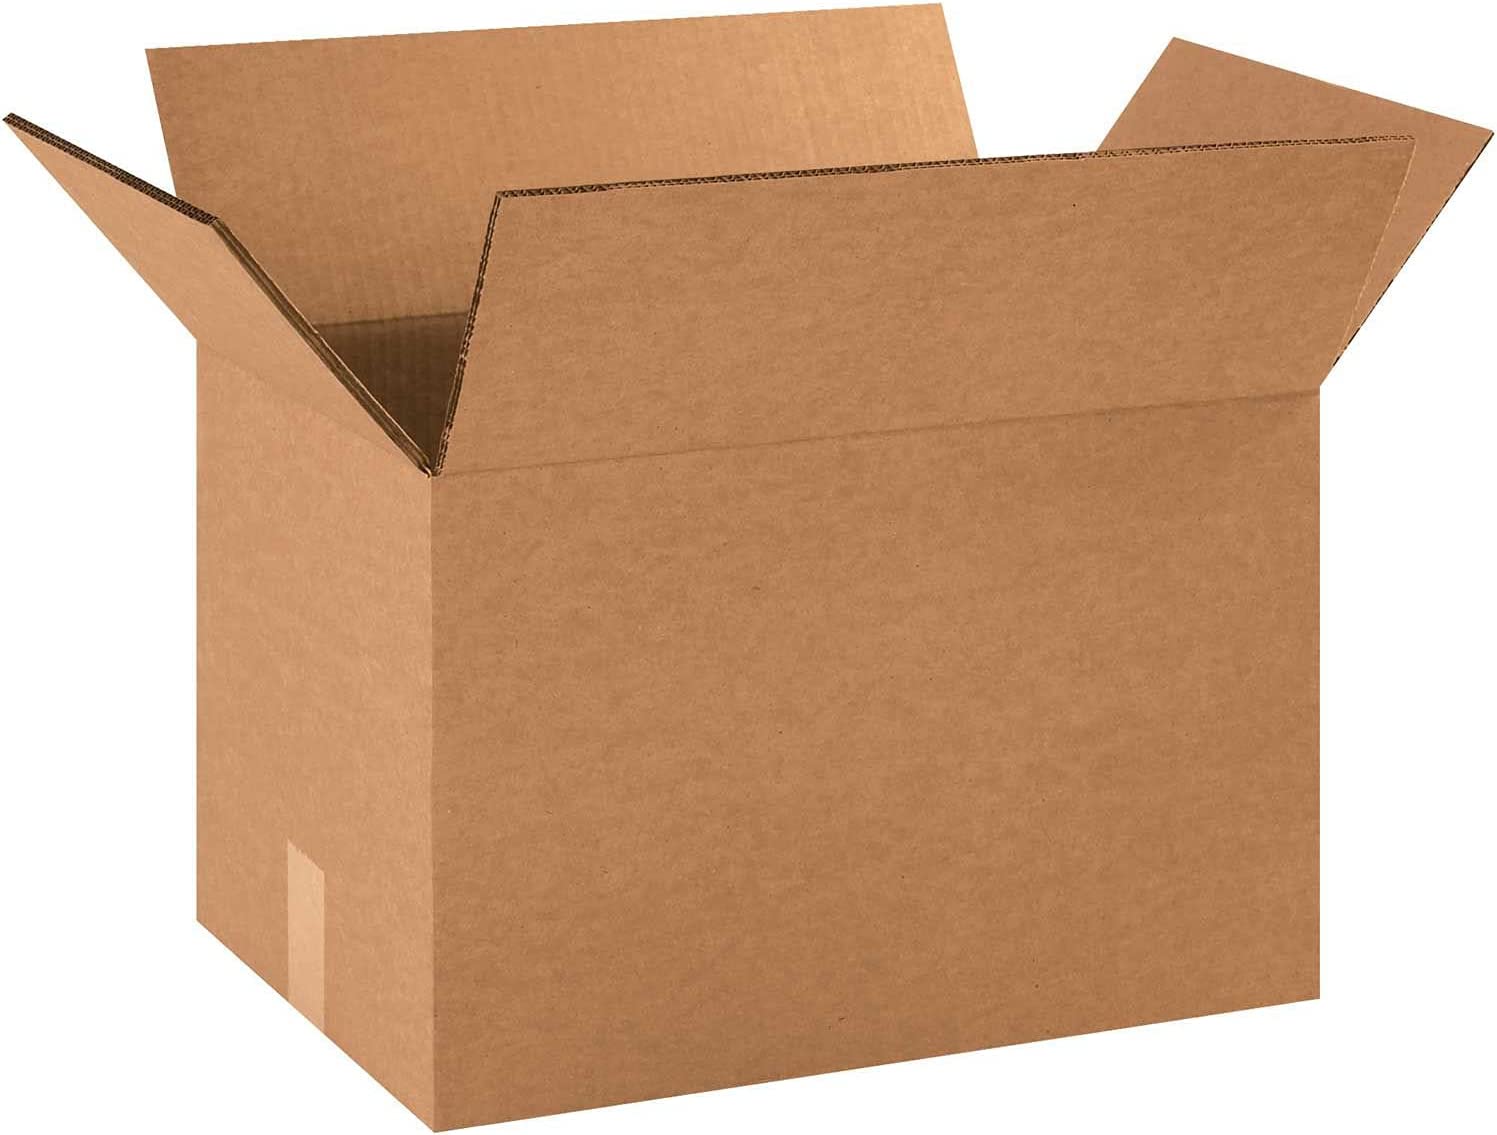 Corrugated Packing Paper - ABC Box Co.